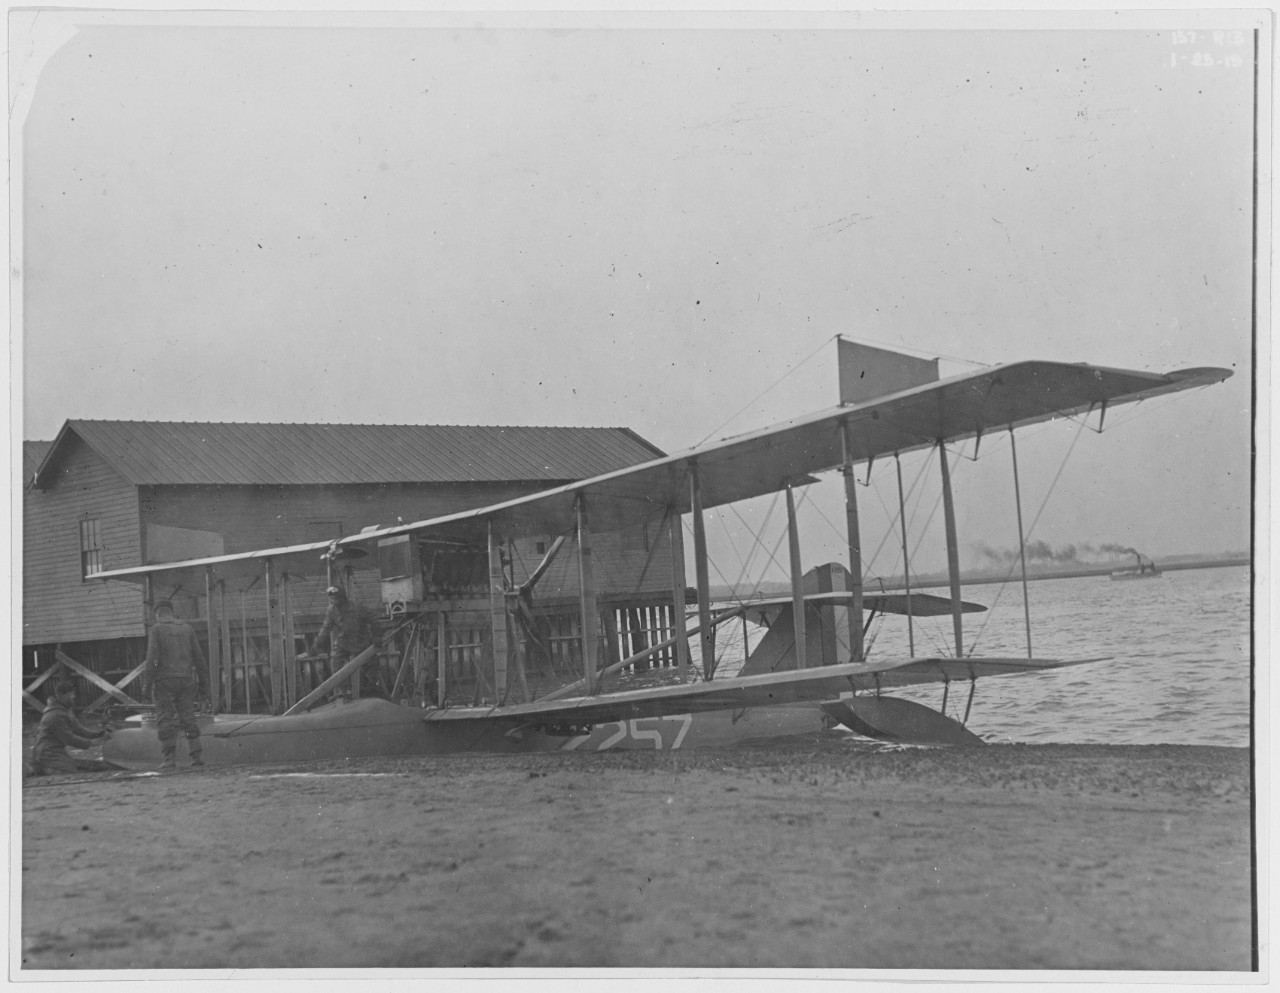 H-Boat just returned to Station. January 25, 1919. U.S. Naval Air Station, Cape May, New Jersey